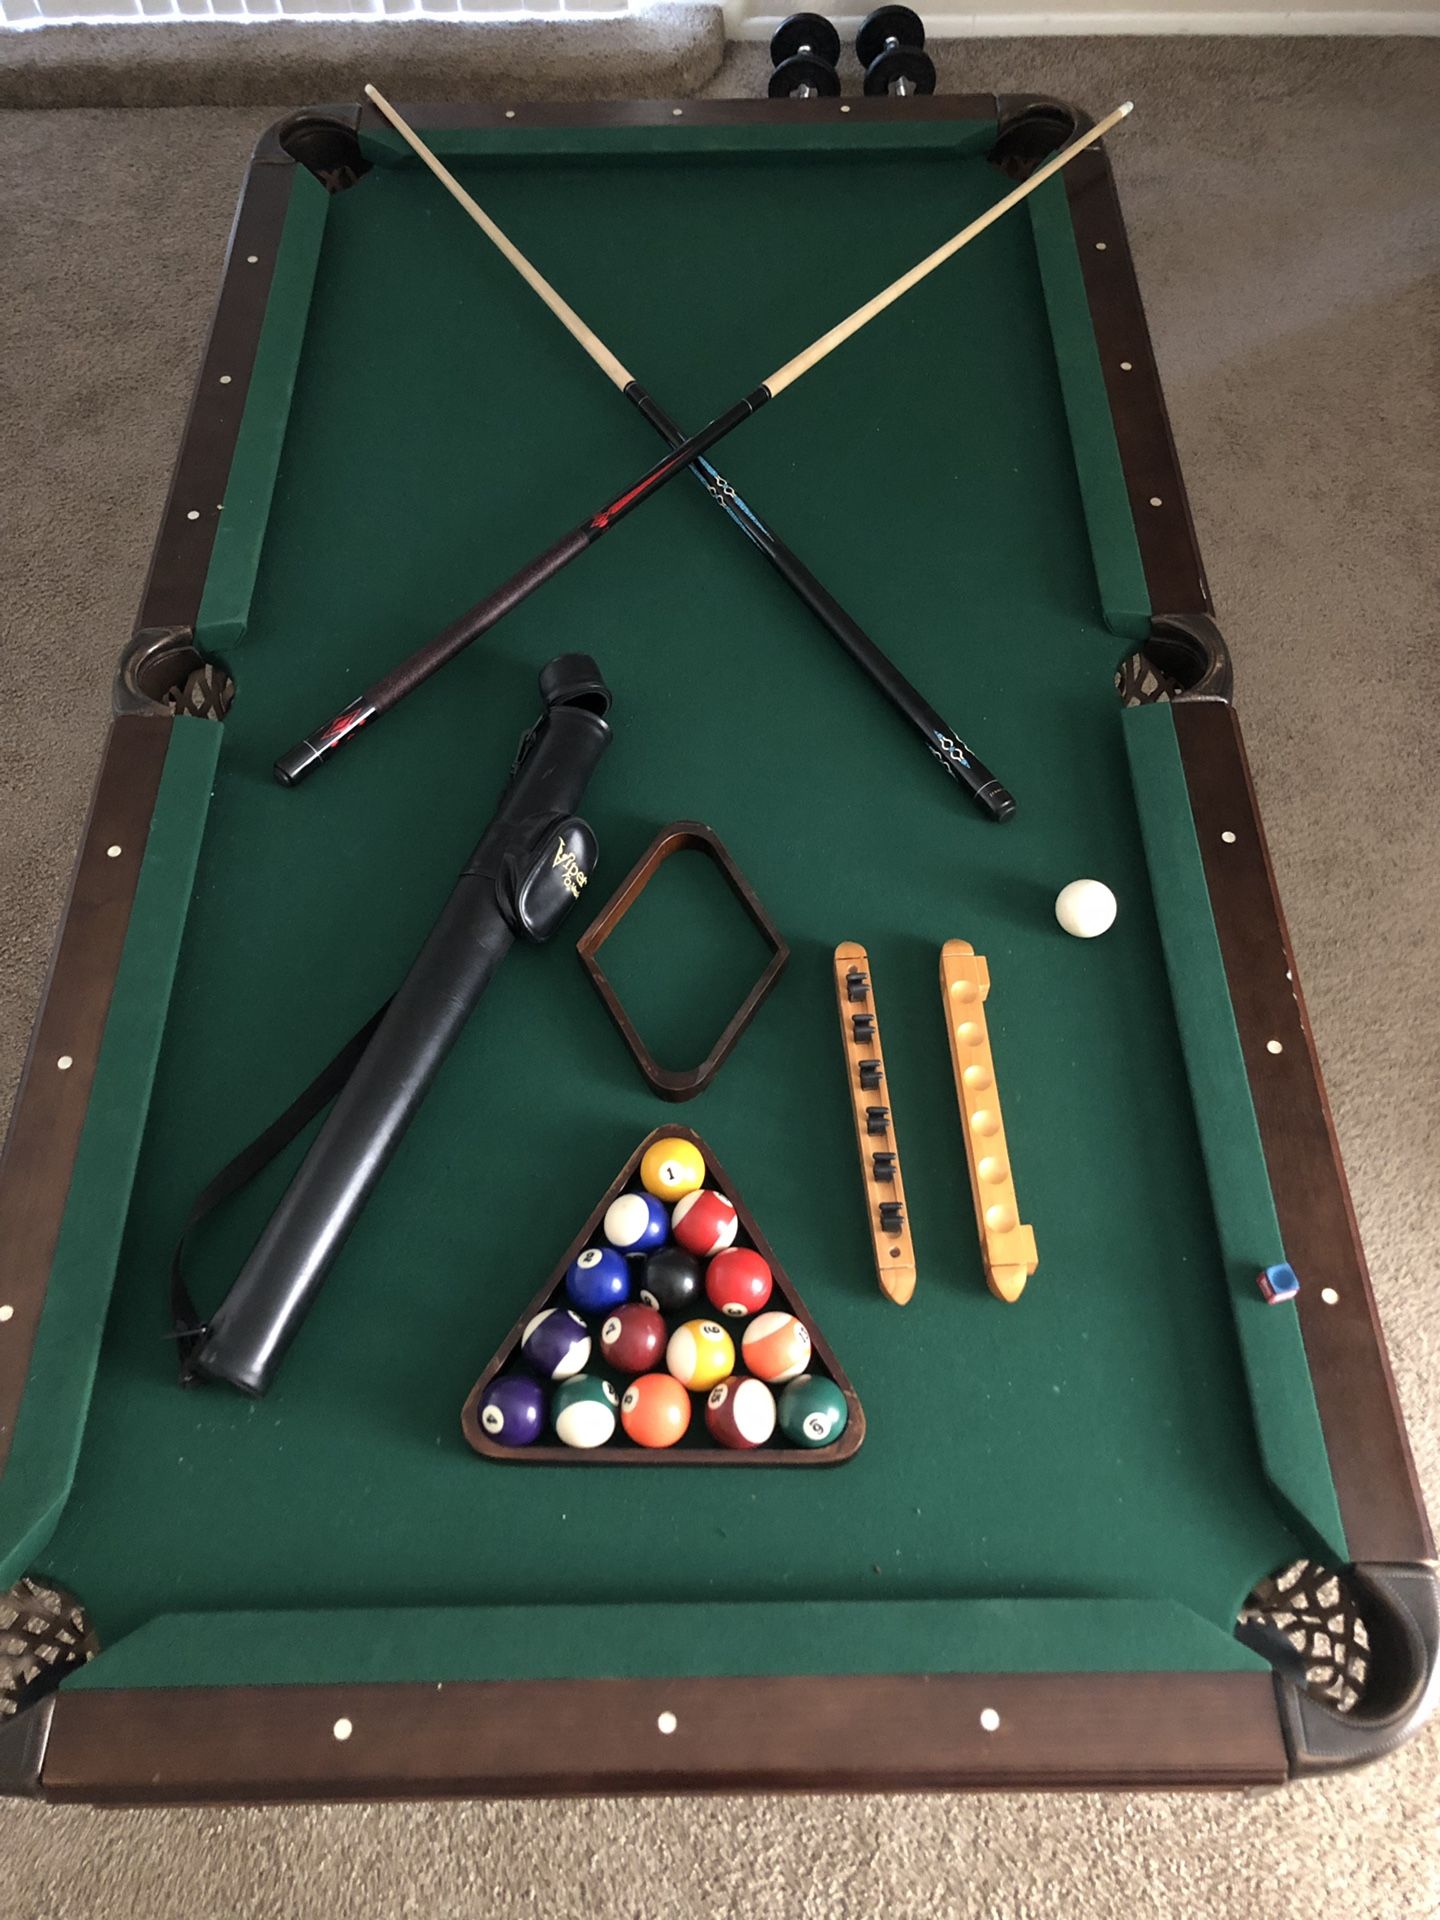 Pool table with all of the essentials